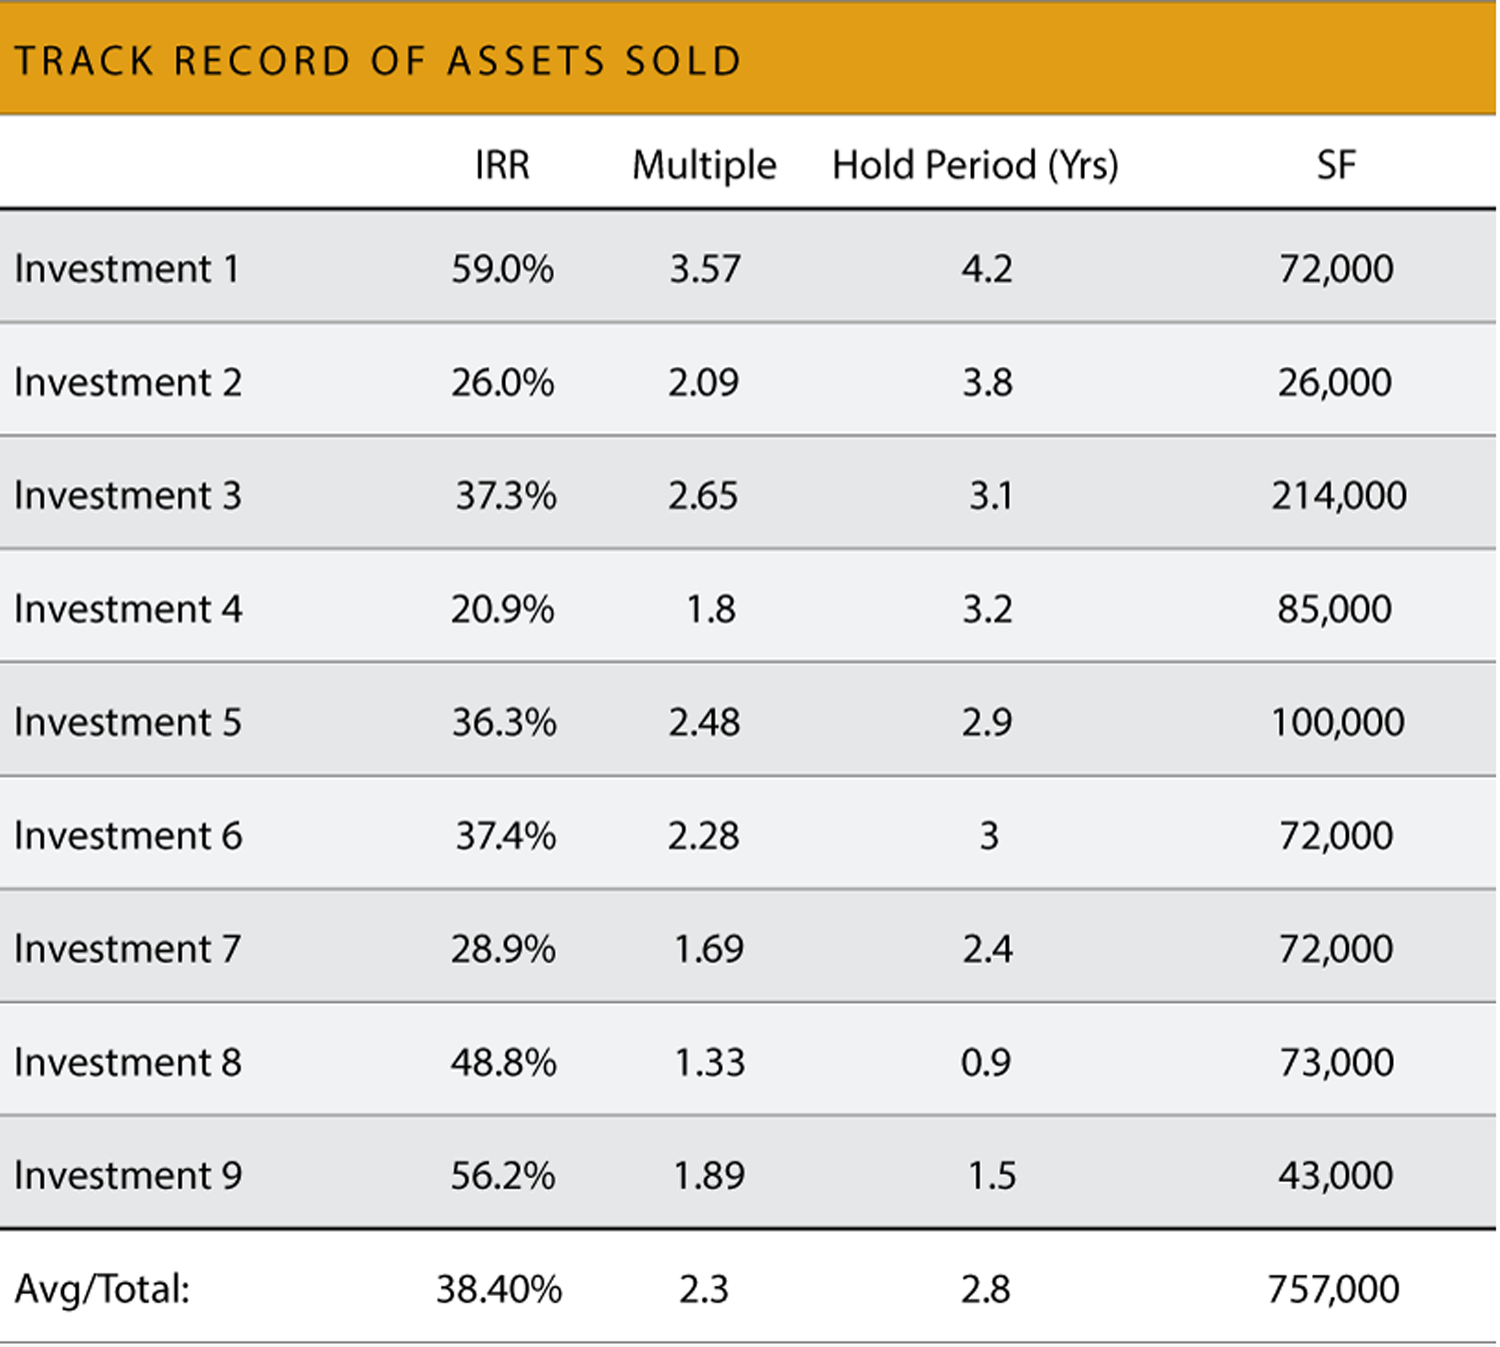 A table showing the track record of assets sold